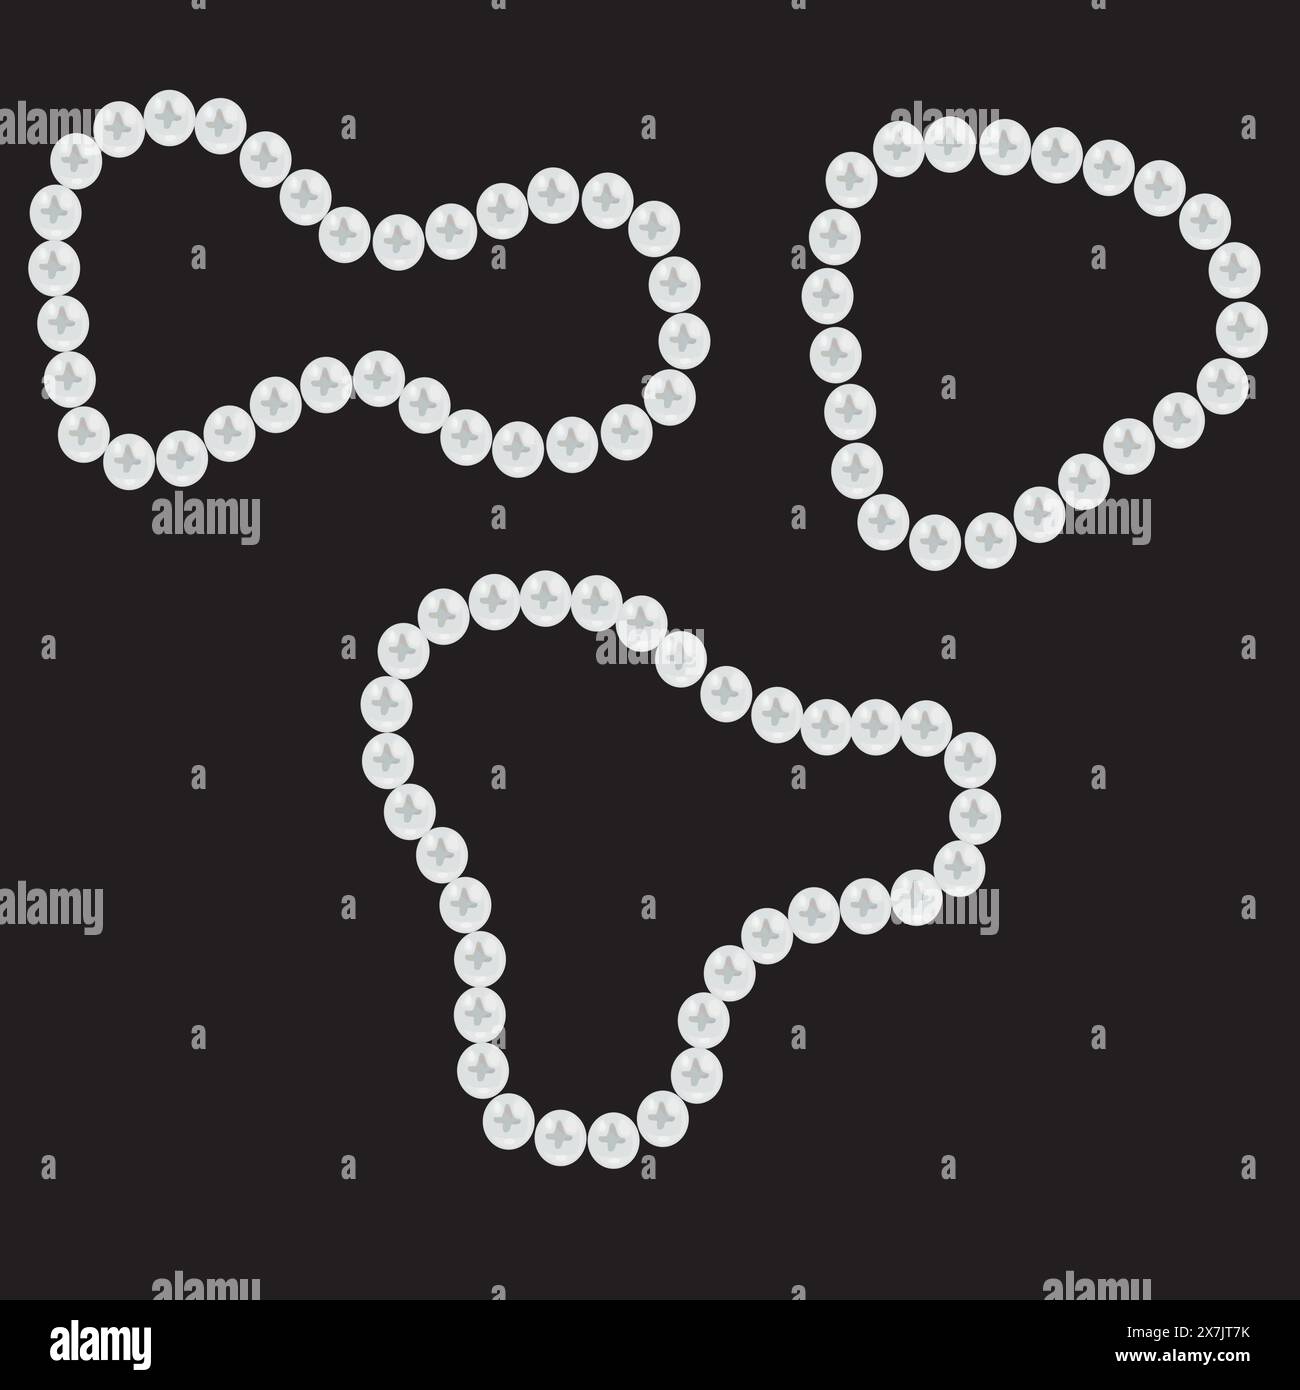 Pearl necklace on a black background. Seamless pattern. Vector illustration. Stock Vector